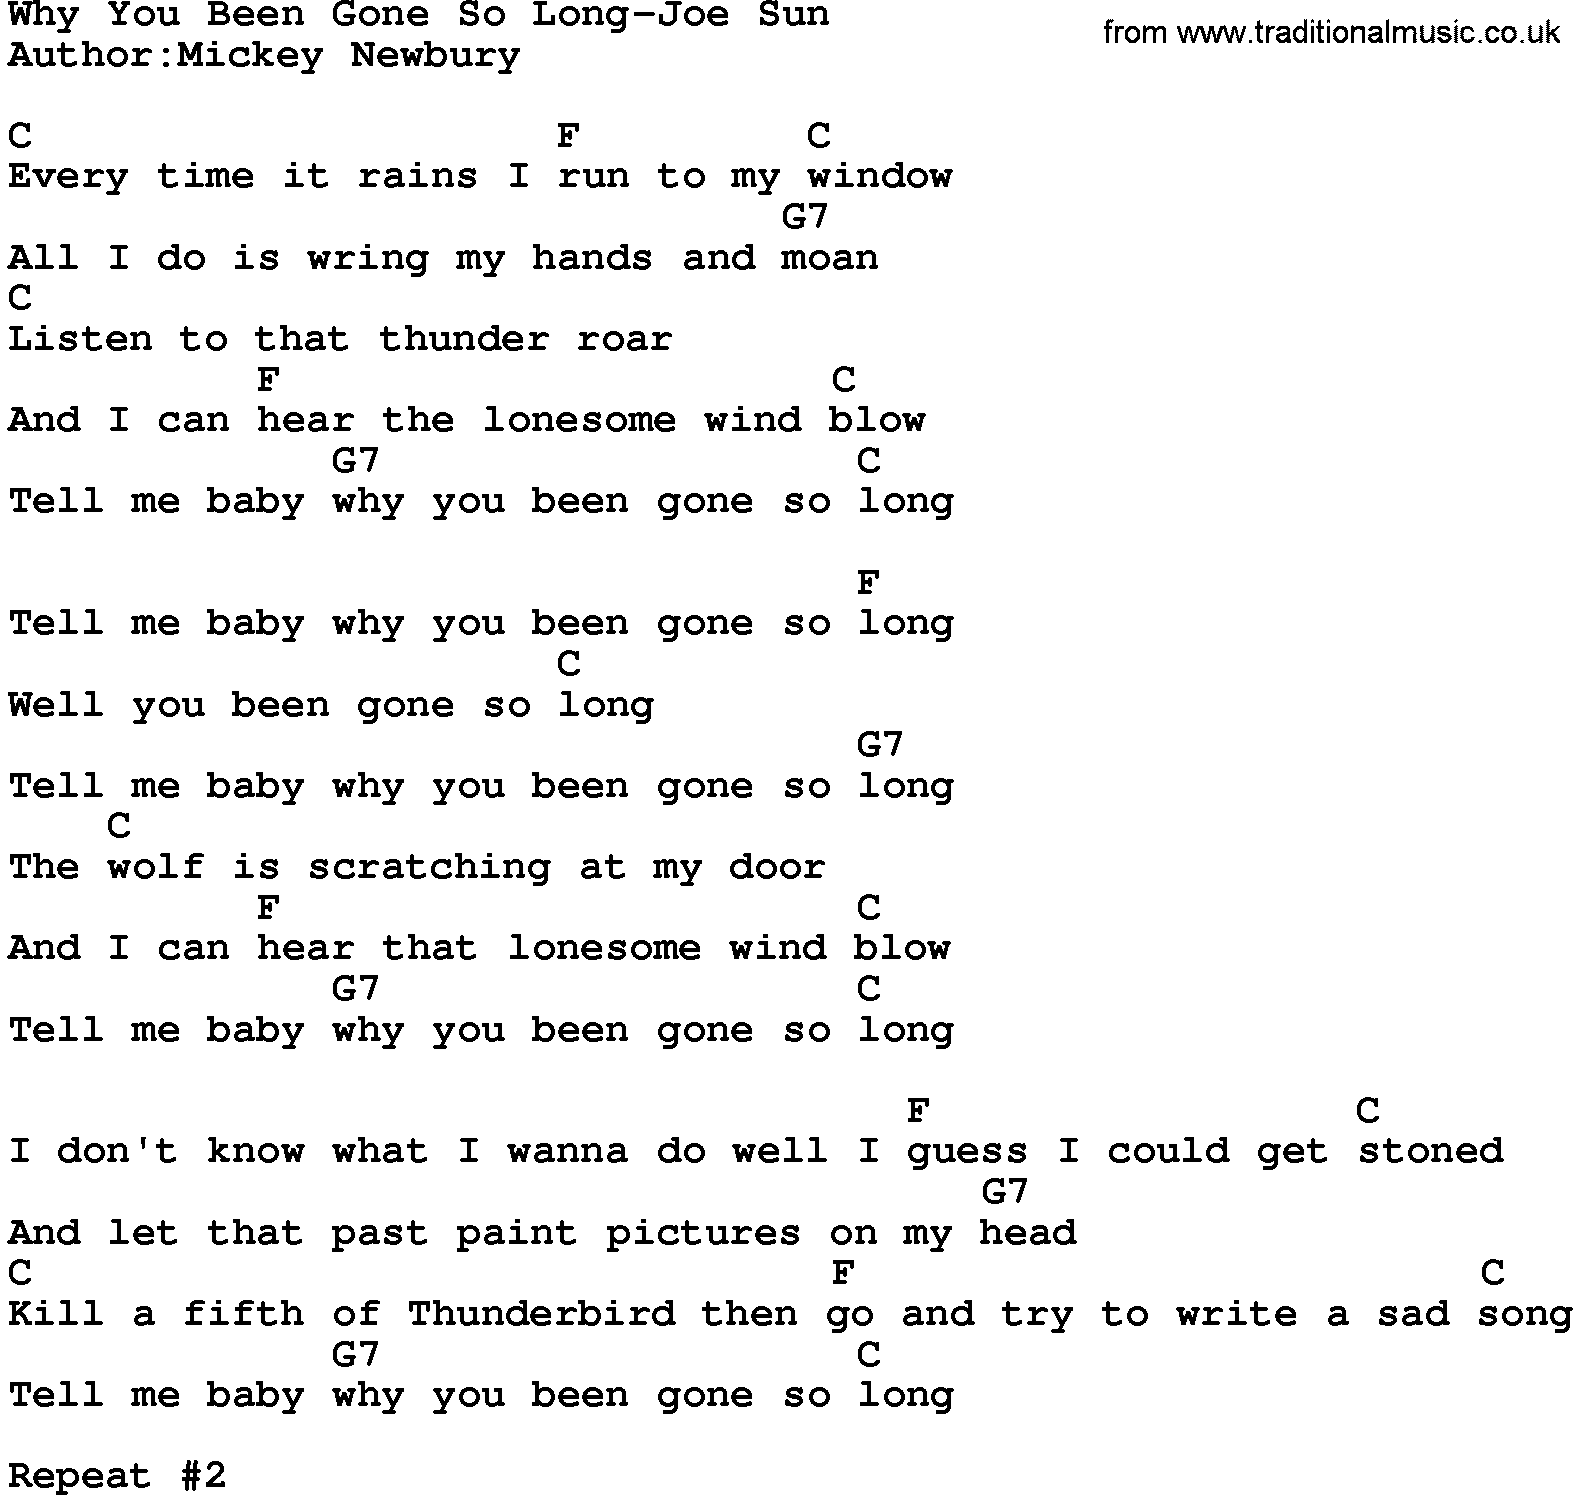 Country music song: Why You Been Gone So Long-Joe Sun lyrics and chords